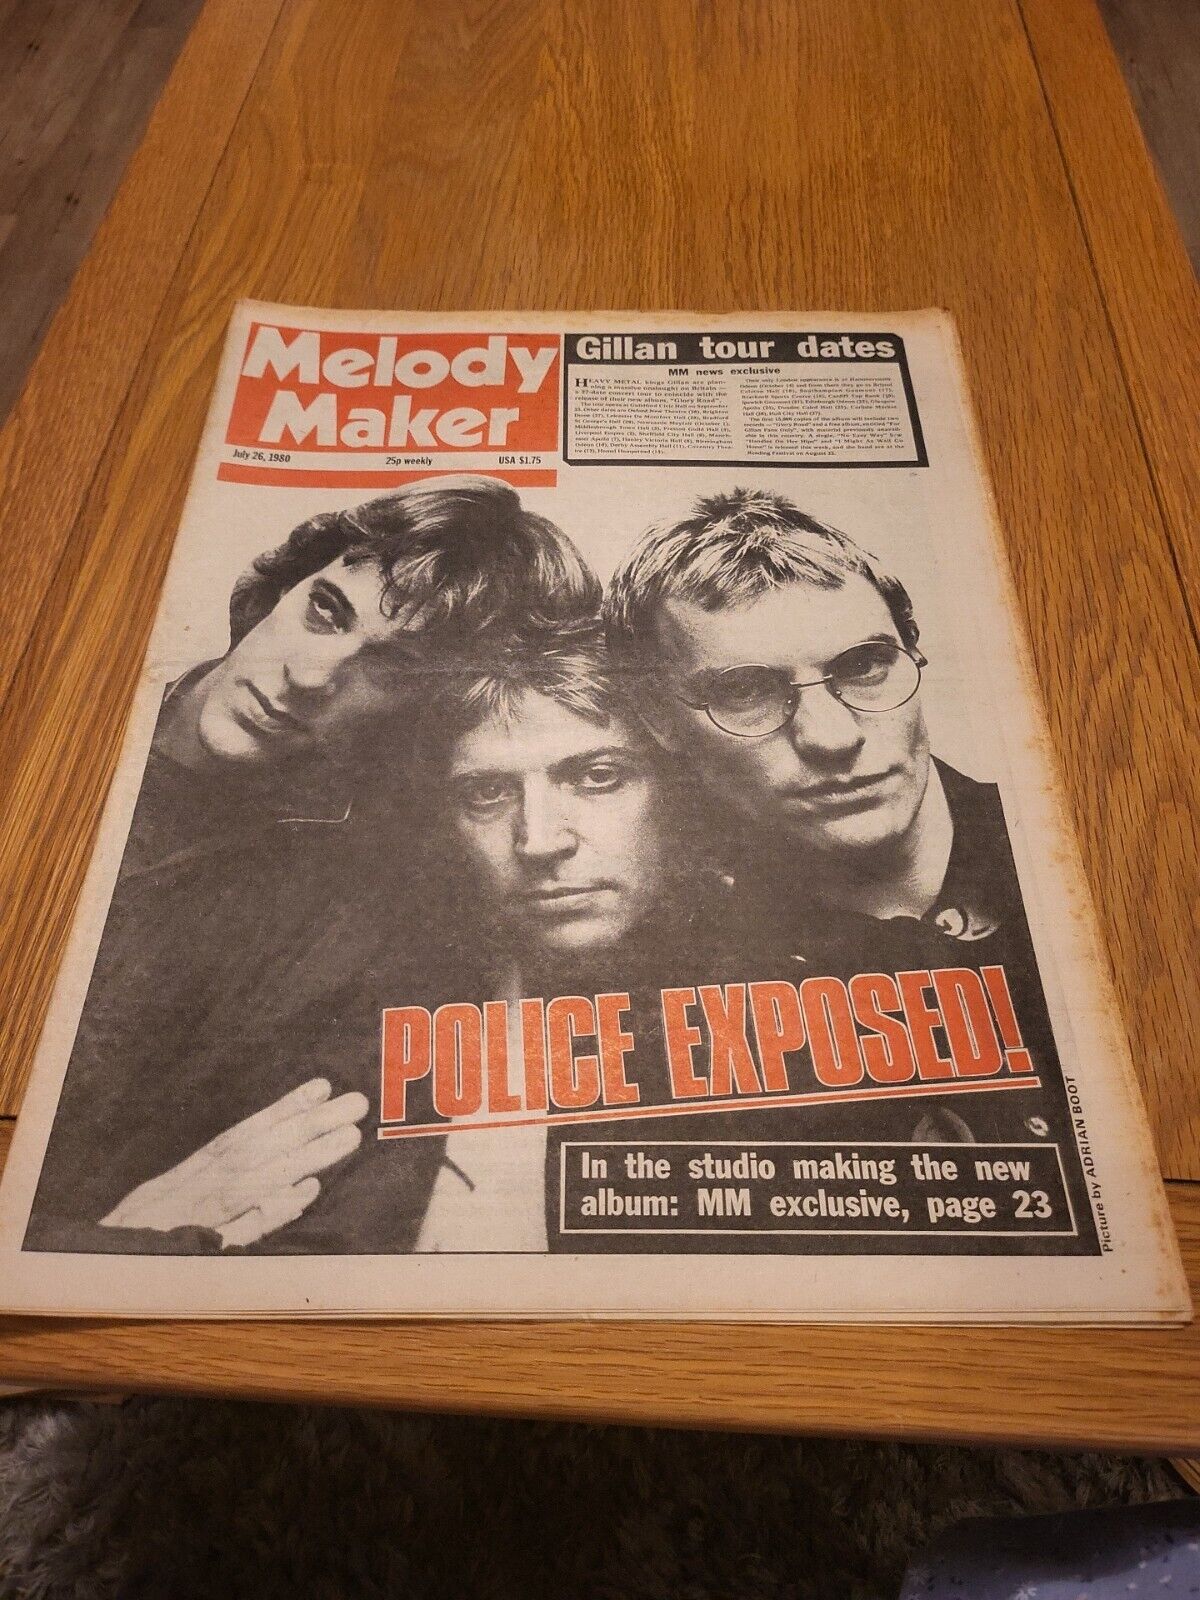 MELODY Maker July 26th 1980 - Police Exposed front cover